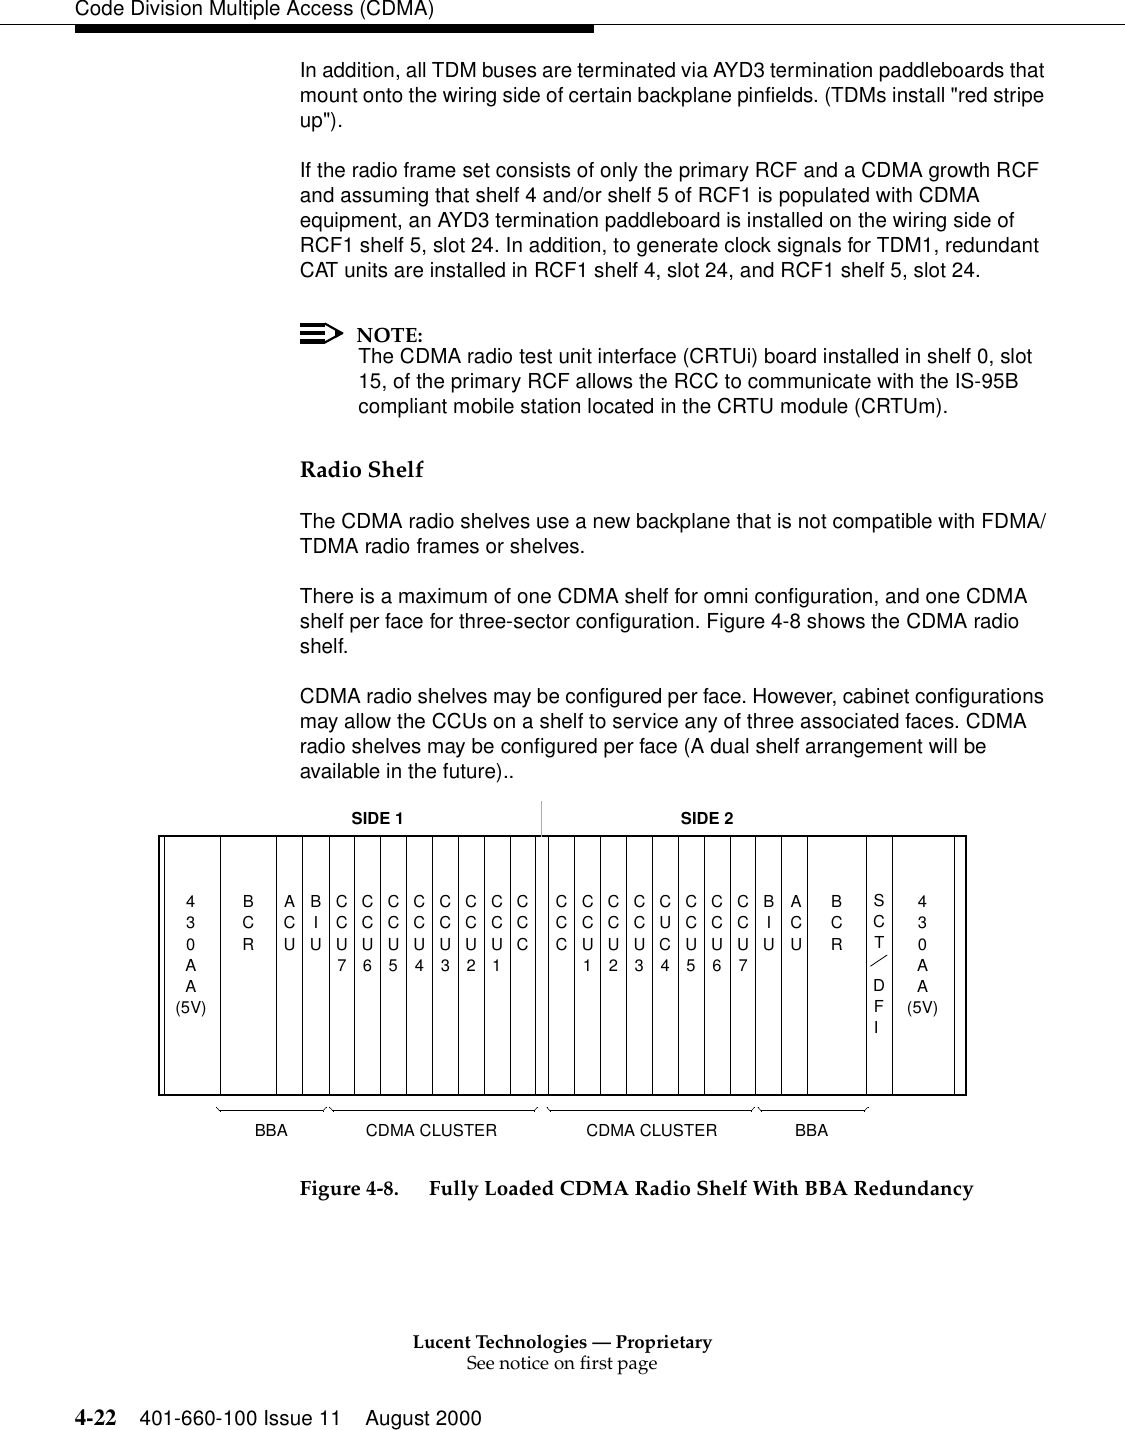 Lucent Technologies — ProprietarySee notice on first page4-22 401-660-100 Issue 11 August 2000Code Division Multiple Access (CDMA)In addition, all TDM buses are terminated via AYD3 termination paddleboards that mount onto the wiring side of certain backplane pinfields. (TDMs install &quot;red stripe up&quot;).If the radio frame set consists of only the primary RCF and a CDMA growth RCF and assuming that shelf 4 and/or shelf 5 of RCF1 is populated with CDMA equipment, an AYD3 termination paddleboard is installed on the wiring side of RCF1 shelf 5, slot 24. In addition, to generate clock signals for TDM1, redundant CAT units are installed in RCF1 shelf 4, slot 24, and RCF1 shelf 5, slot 24.NOTE:The CDMA radio test unit interface (CRTUi) board installed in shelf 0, slot 15, of the primary RCF allows the RCC to communicate with the IS-95B compliant mobile station located in the CRTU module (CRTUm).Radio ShelfThe CDMA radio shelves use a new backplane that is not compatible with FDMA/TDMA radio frames or shelves.There is a maximum of one CDMA shelf for omni configuration, and one CDMA shelf per face for three-sector configuration. Figure 4-8 shows the CDMA radio shelf. CDMA radio shelves may be configured per face. However, cabinet configurations may allow the CCUs on a shelf to service any of three associated faces. CDMA radio shelves may be configured per face (A dual shelf arrangement will be available in the future)..Figure 4-8. Fully Loaded CDMA Radio Shelf With BBA Redundancy40AA3ACUBIUCCU7CCU6CCU4CCU3CCU2CCU1CCU5CCU7CCU6CCU4CCU3CCU2CCU1CCU5BCRCCCCCCBIUACUBCRSTDFI40AAC3SIDE 1 SIDE 2CDMA CLUSTER BBACDMA CLUSTERBBA(5V) (5V)